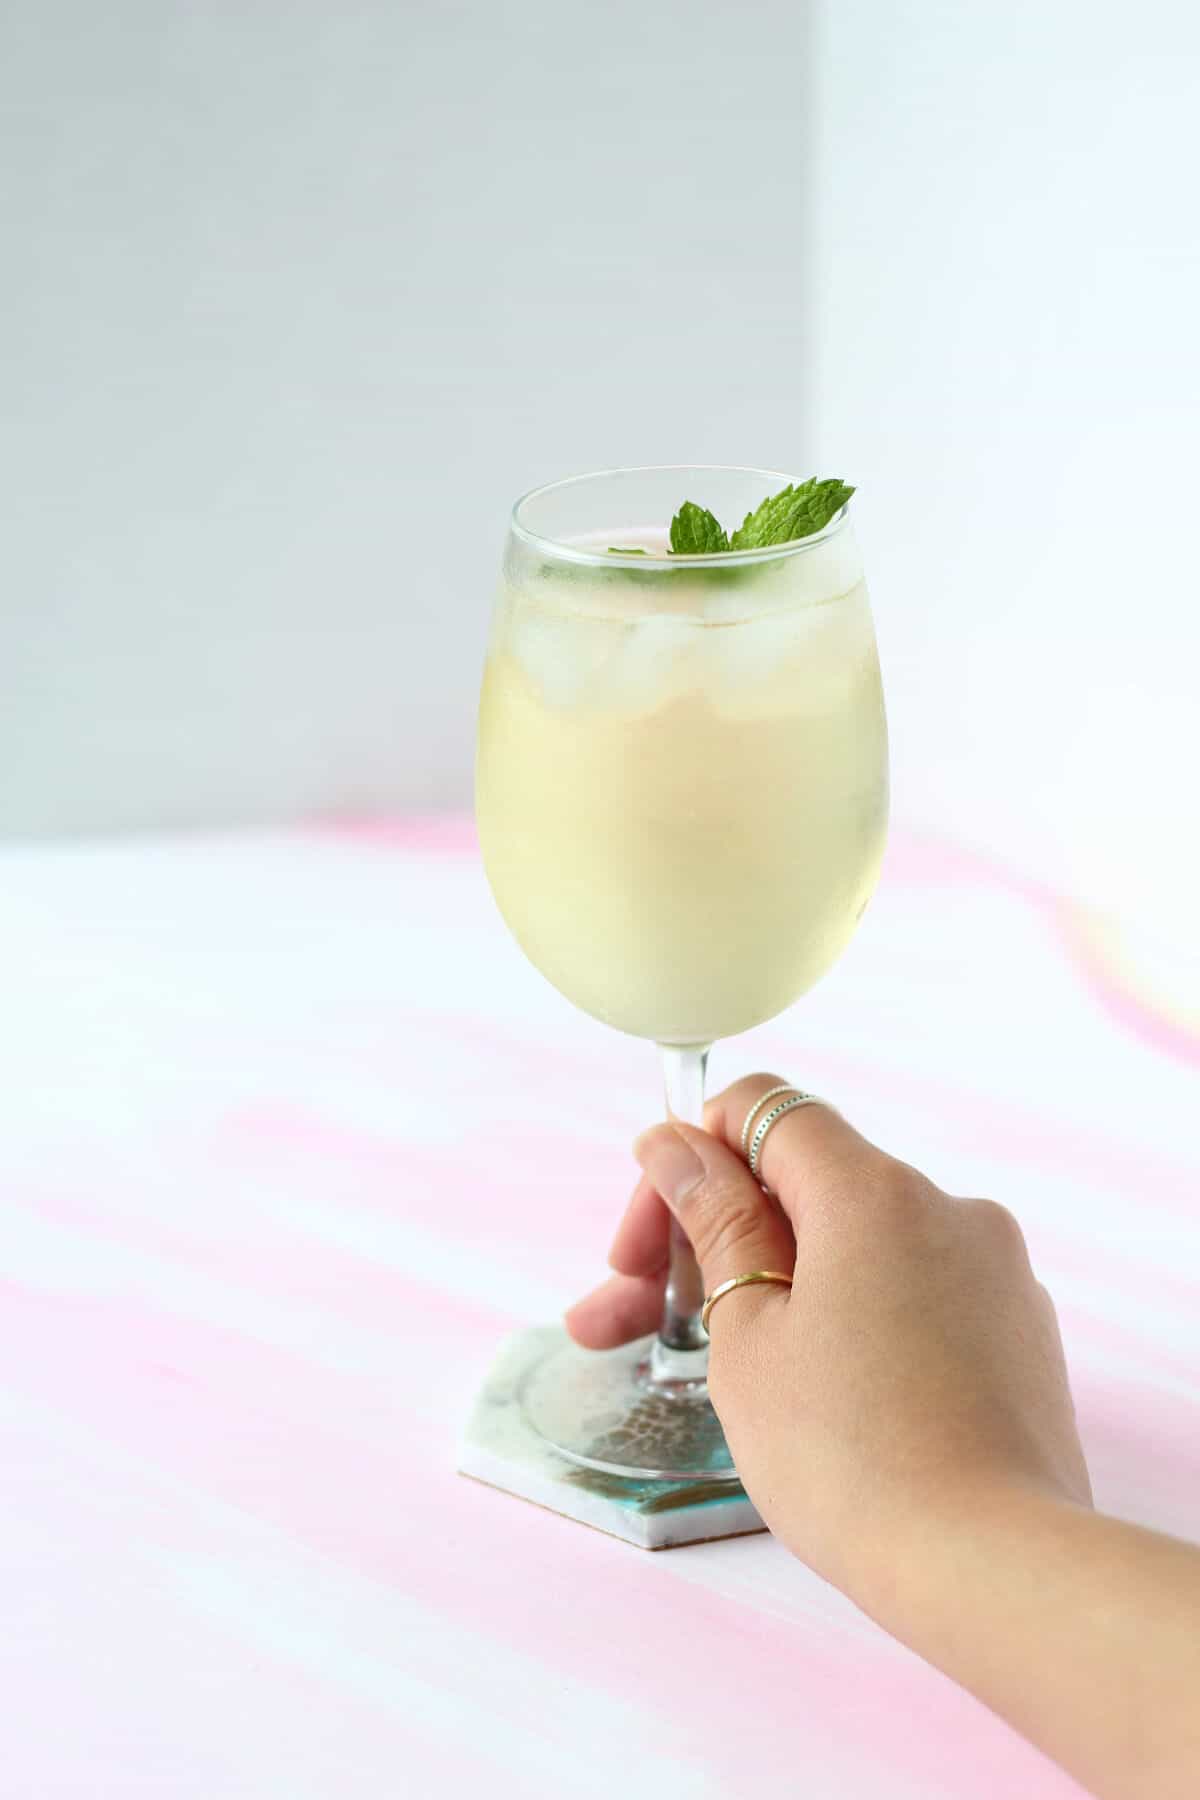 Head holding a wine glass filled with light yellow liquid and a sprig of mint on top.